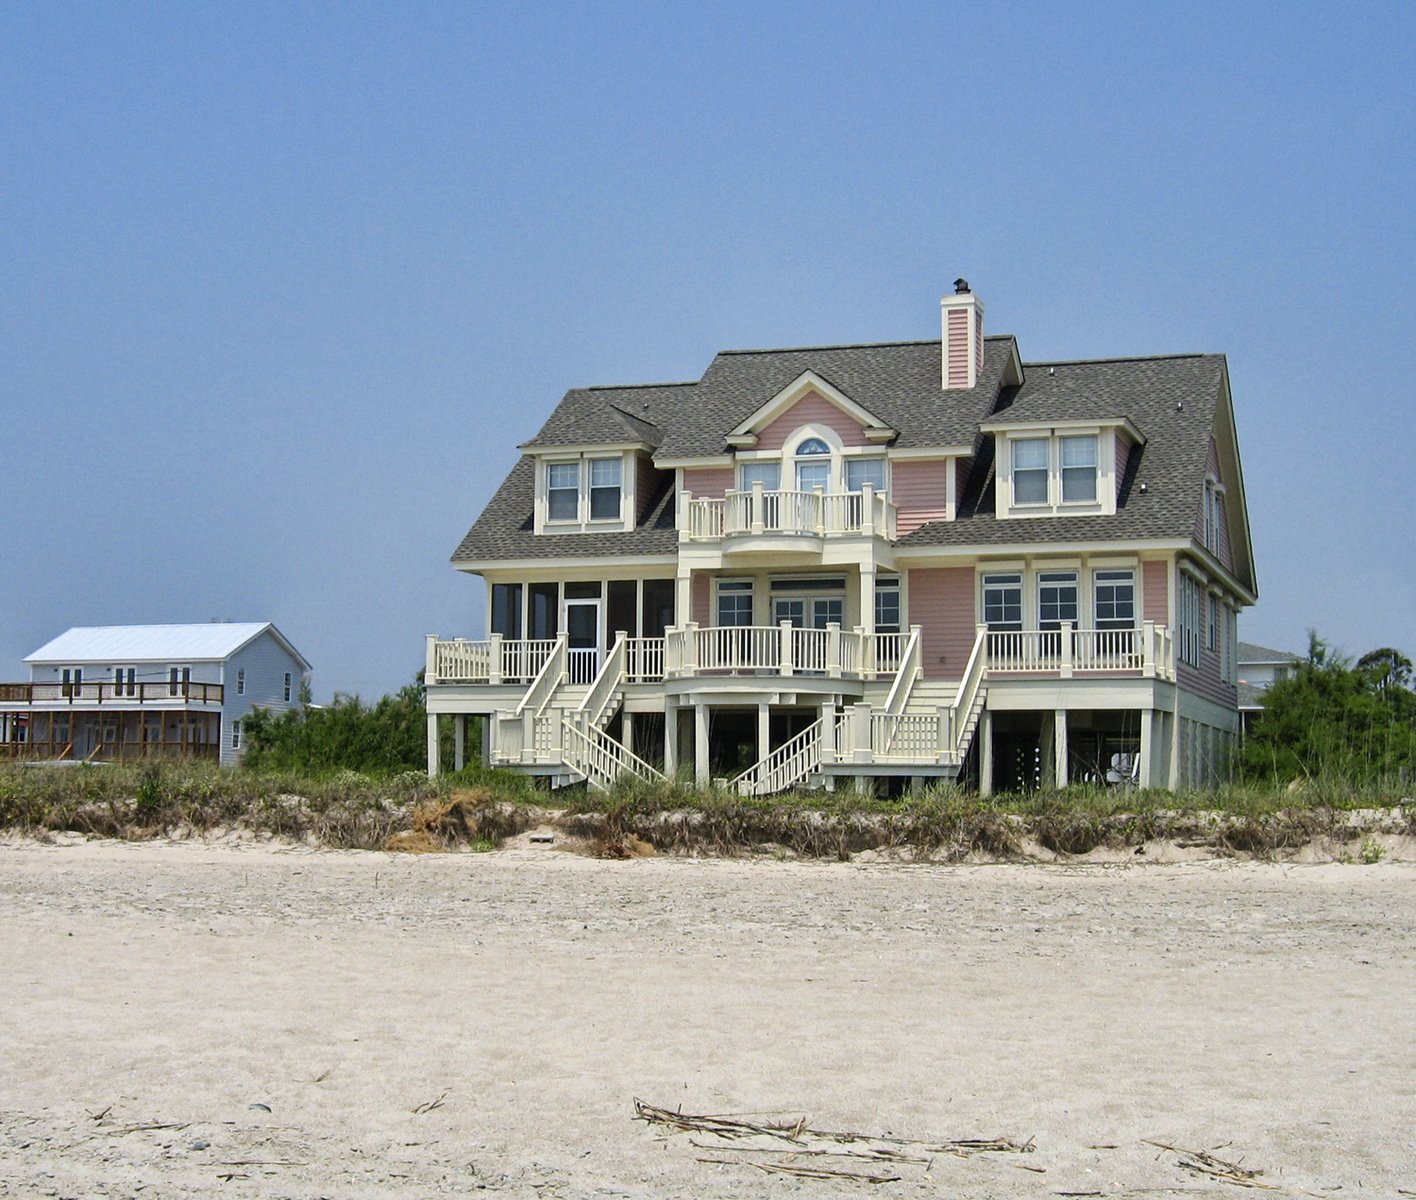 the house is on the sand next to the water